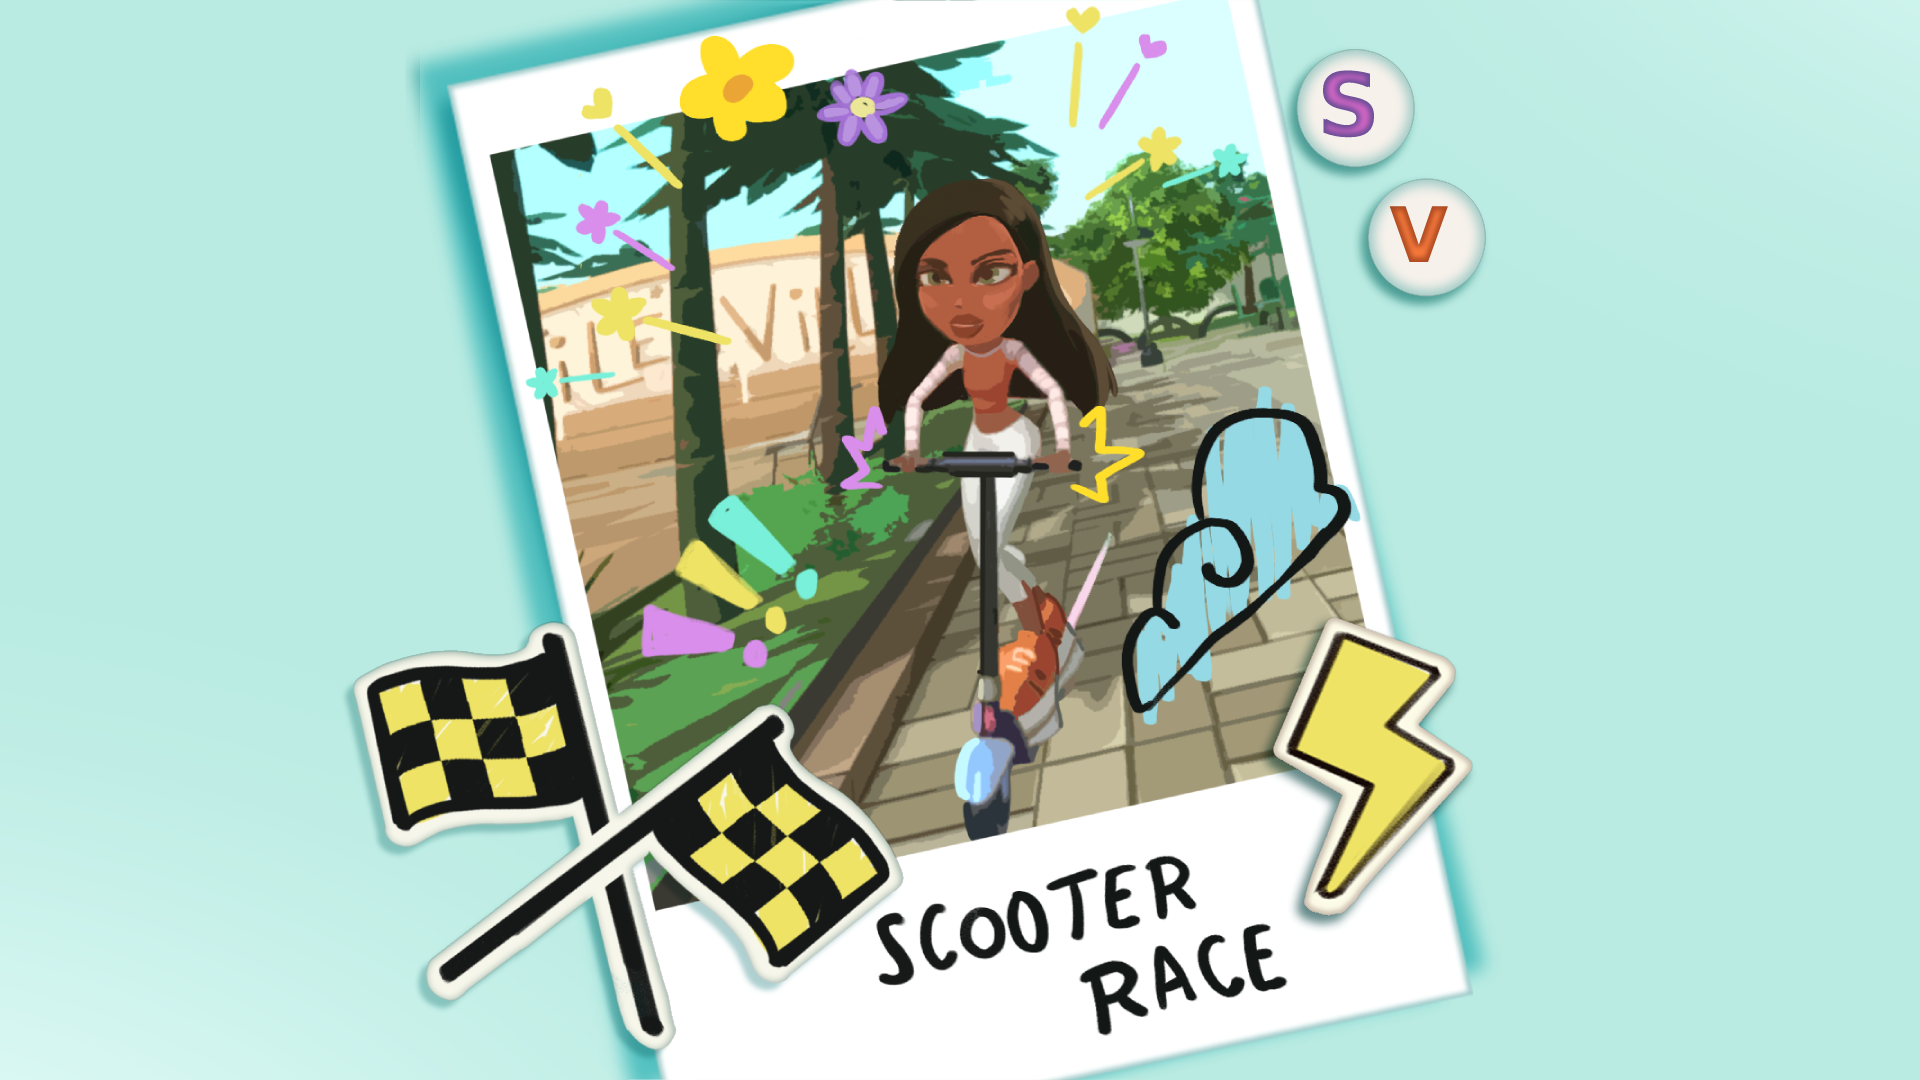 Scooter Race